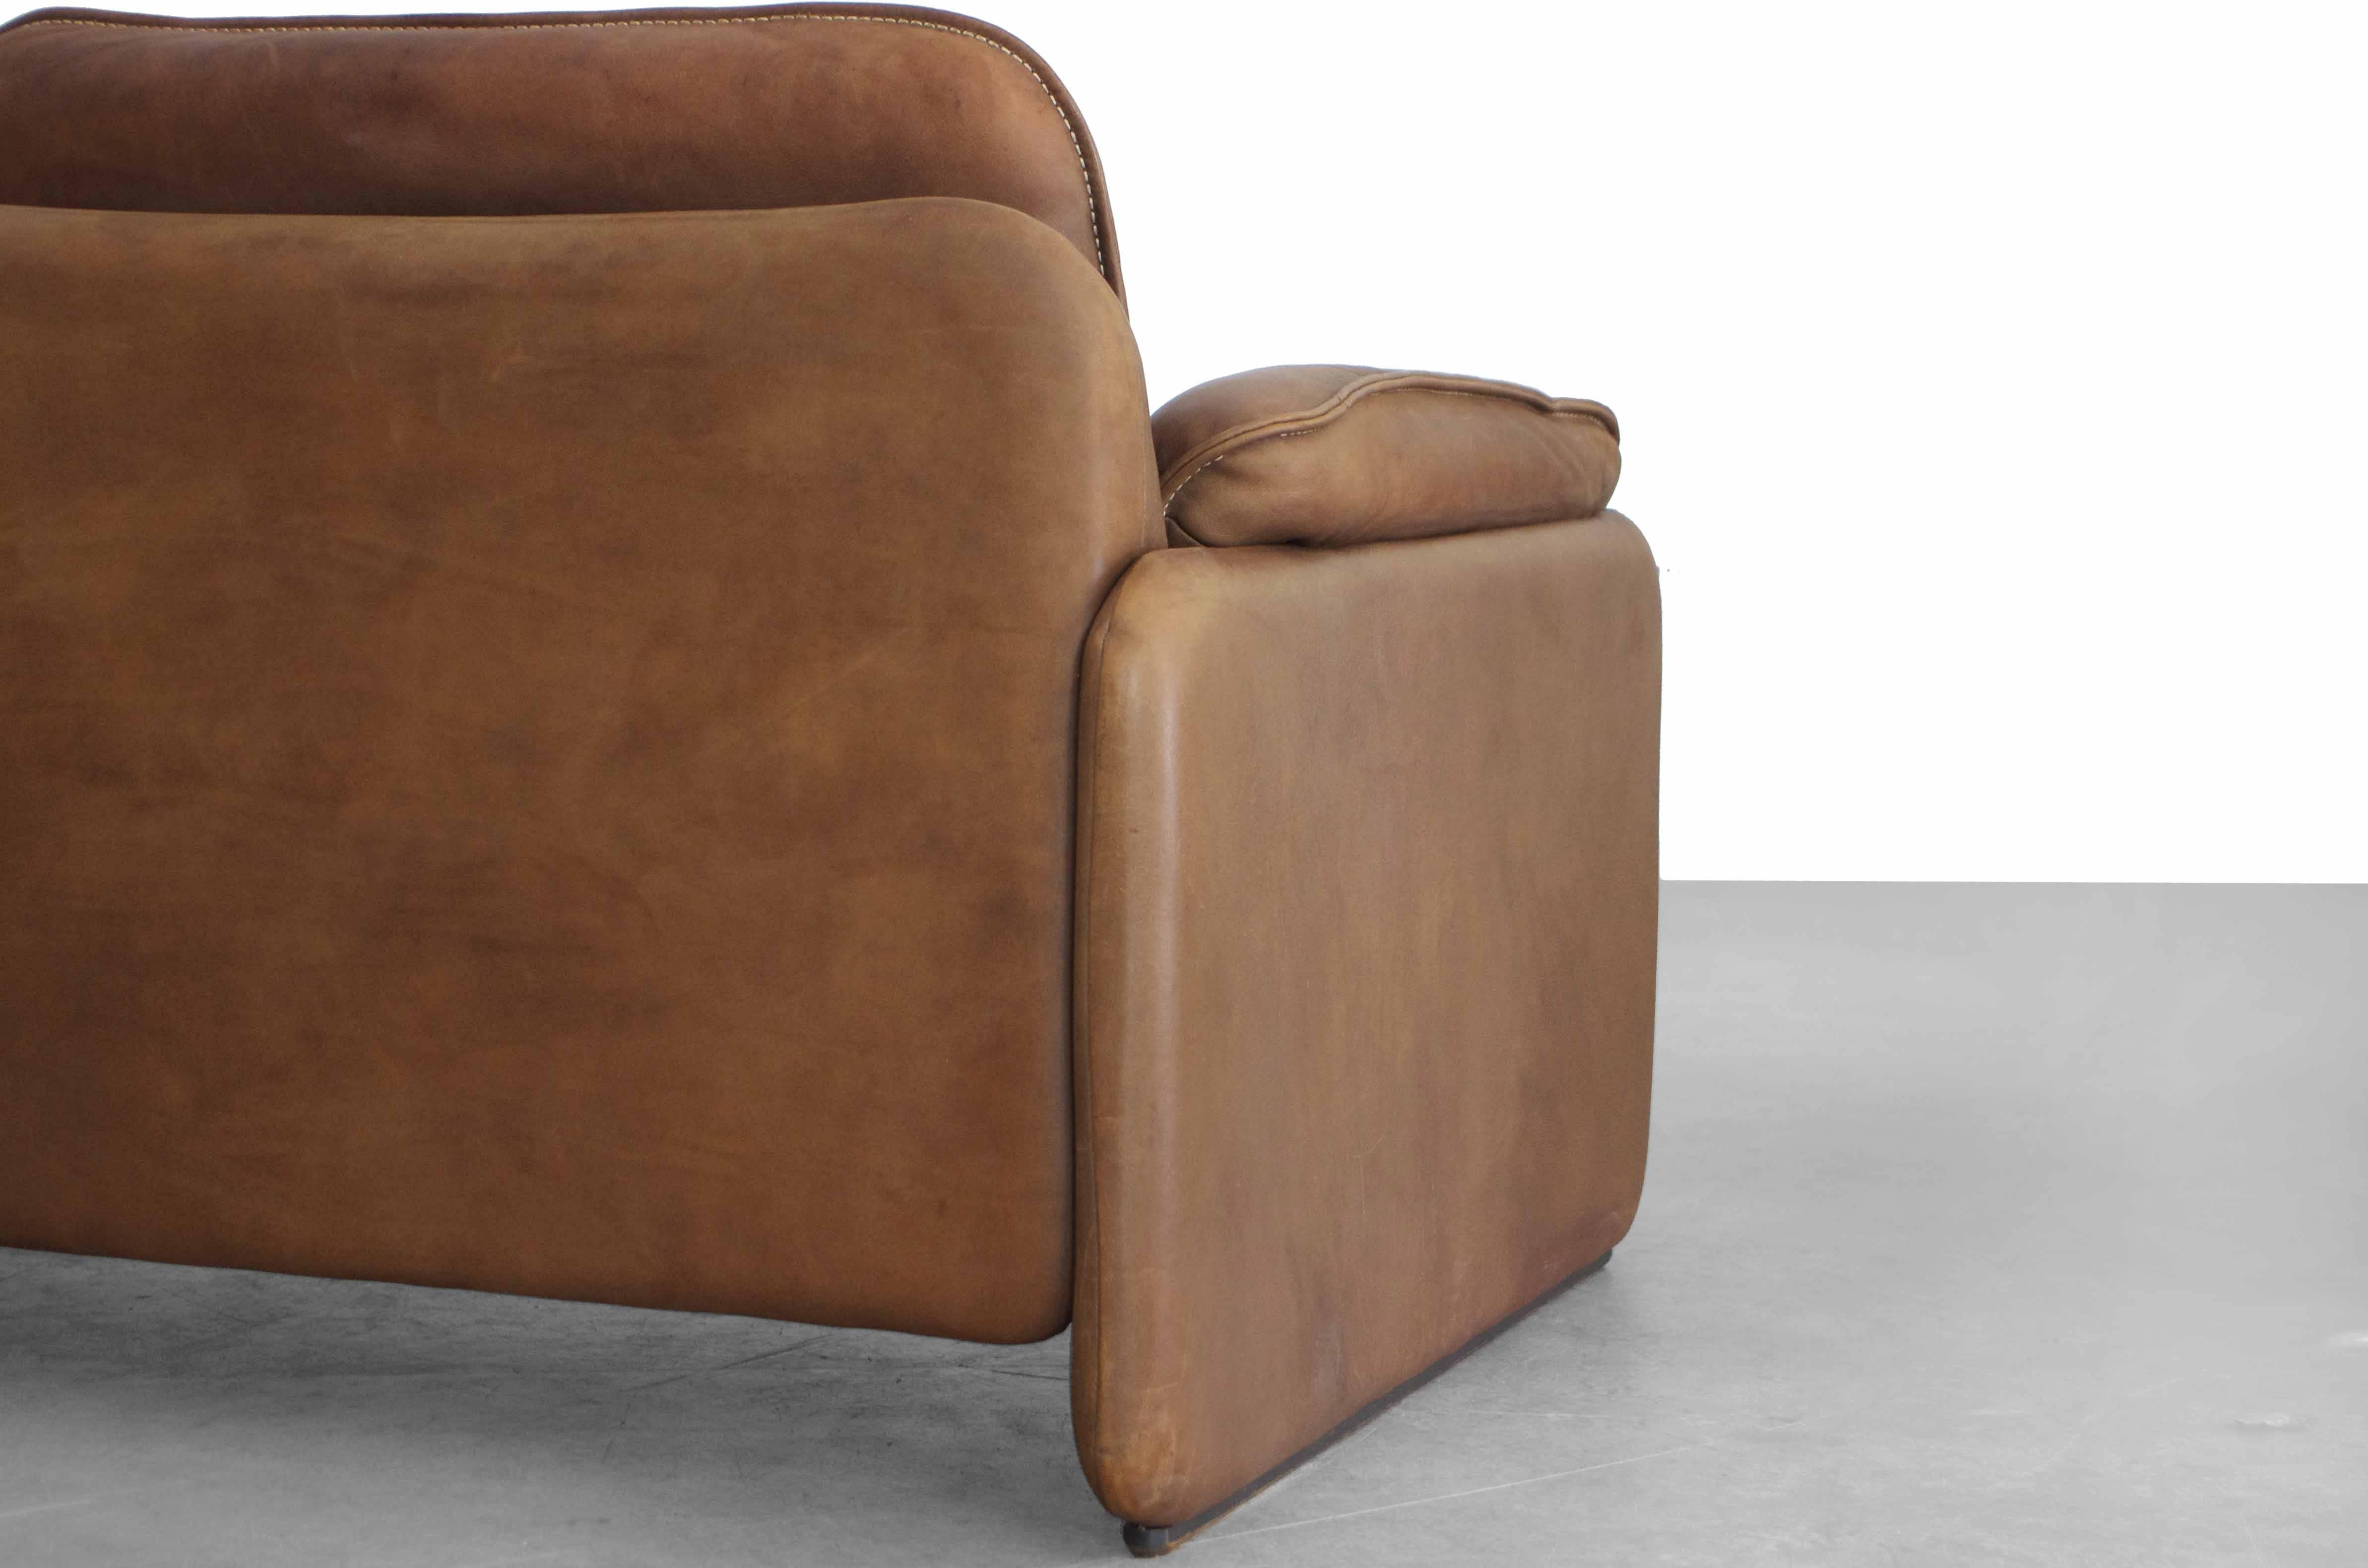 20th Century Ds-61 Leather Sofa by De Sede